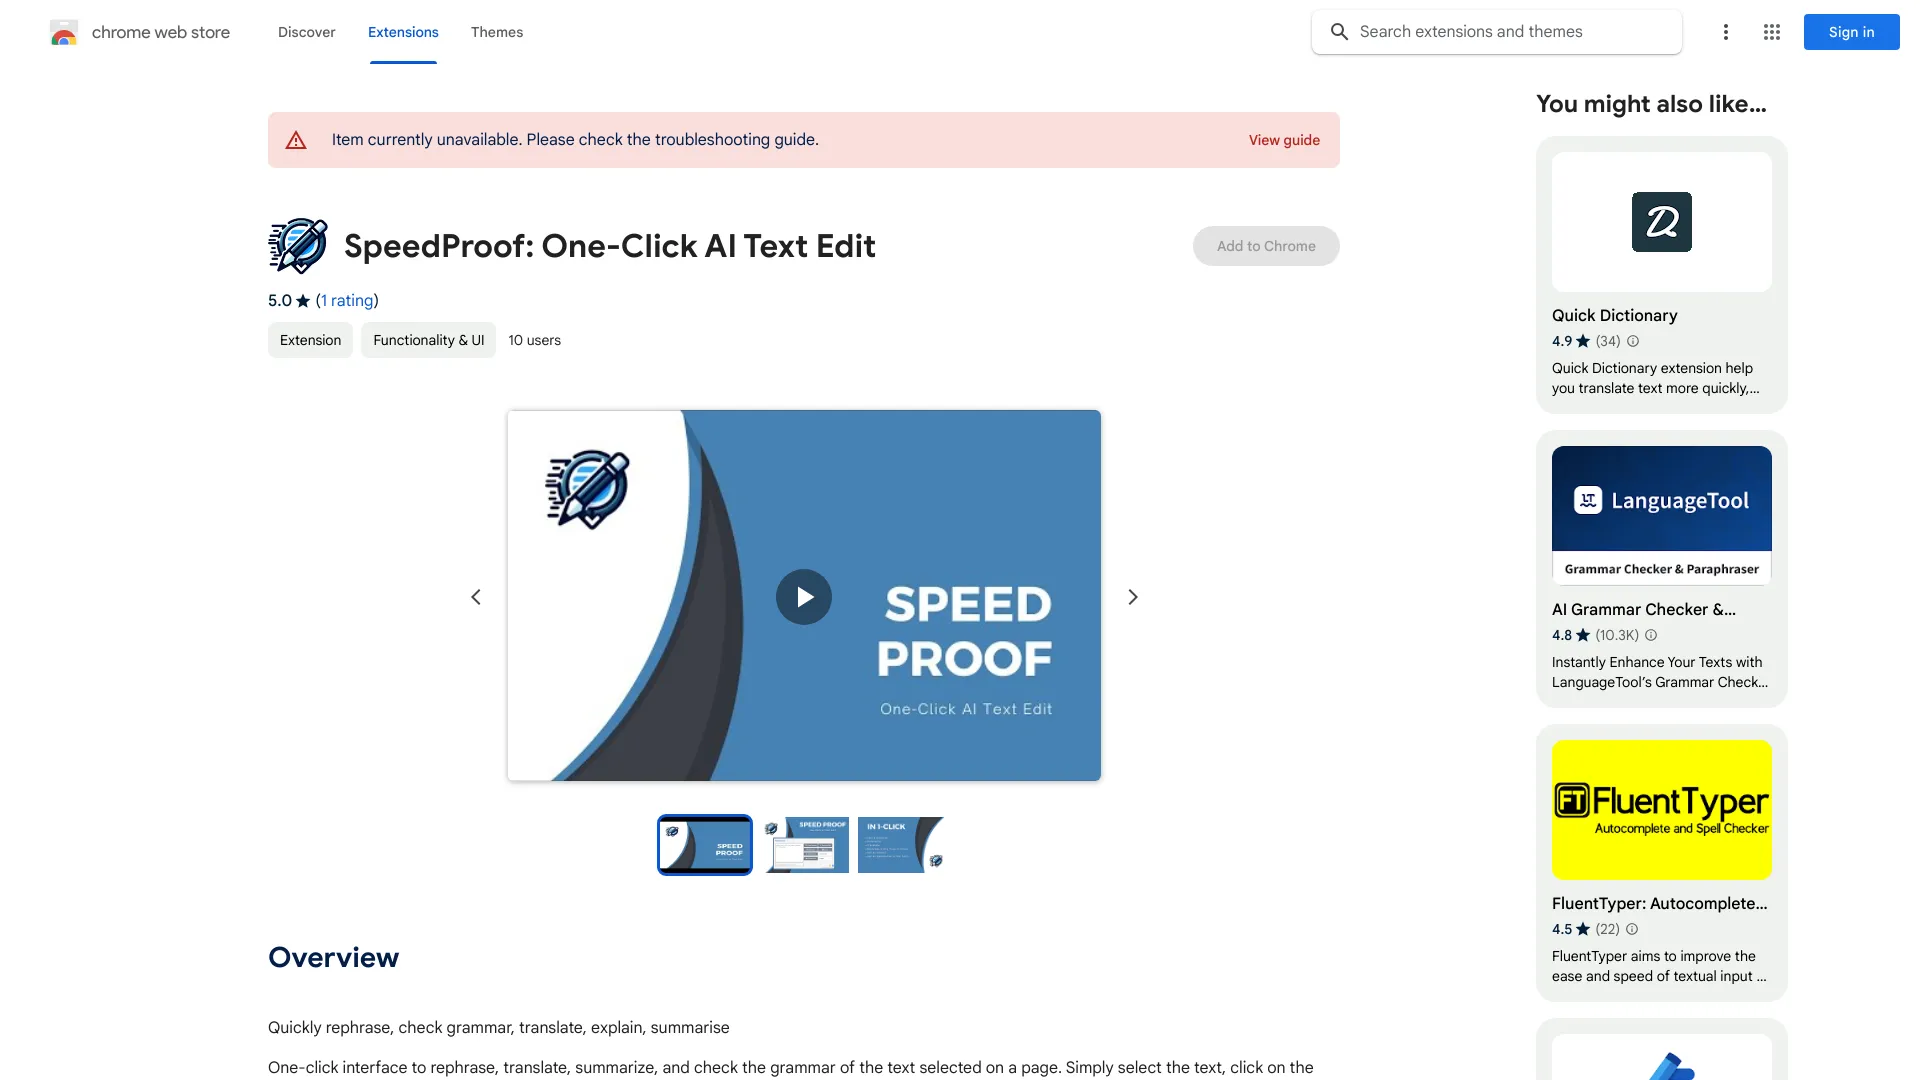 SpeedProof: One-Click AI Text Edit